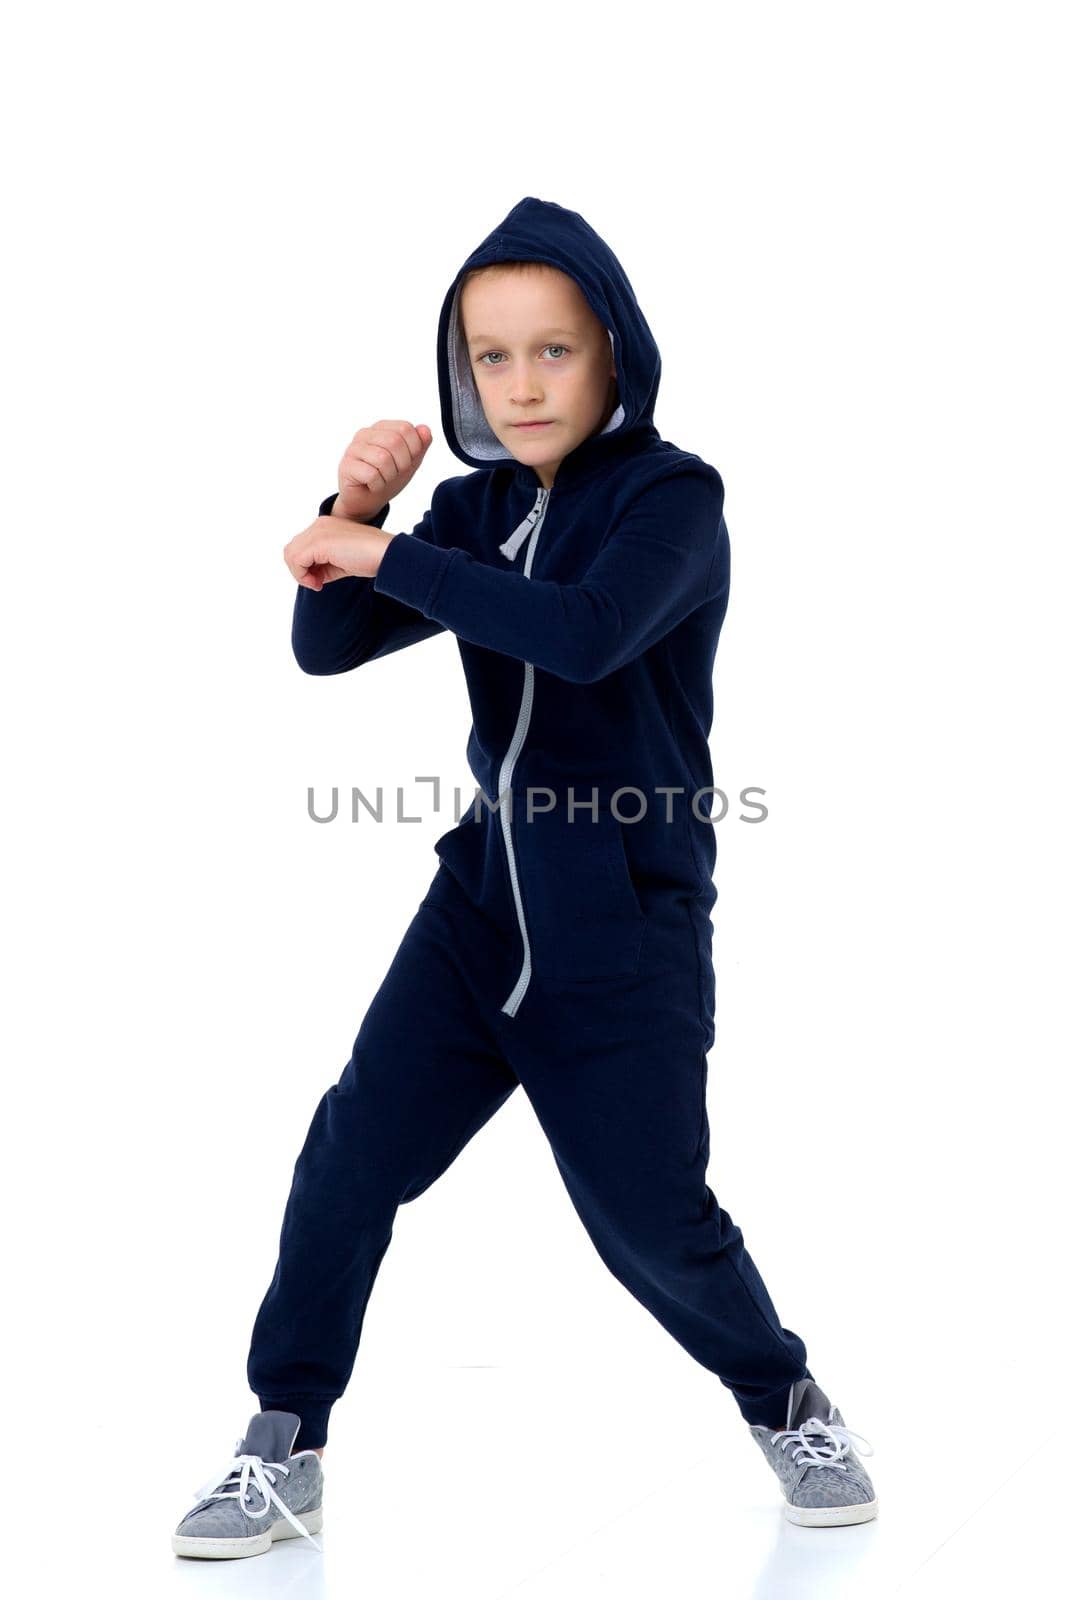 Preteen boy in blue warm overalls. Handsome stylish boy wearing hooded jumpsuit posing against white background in studio